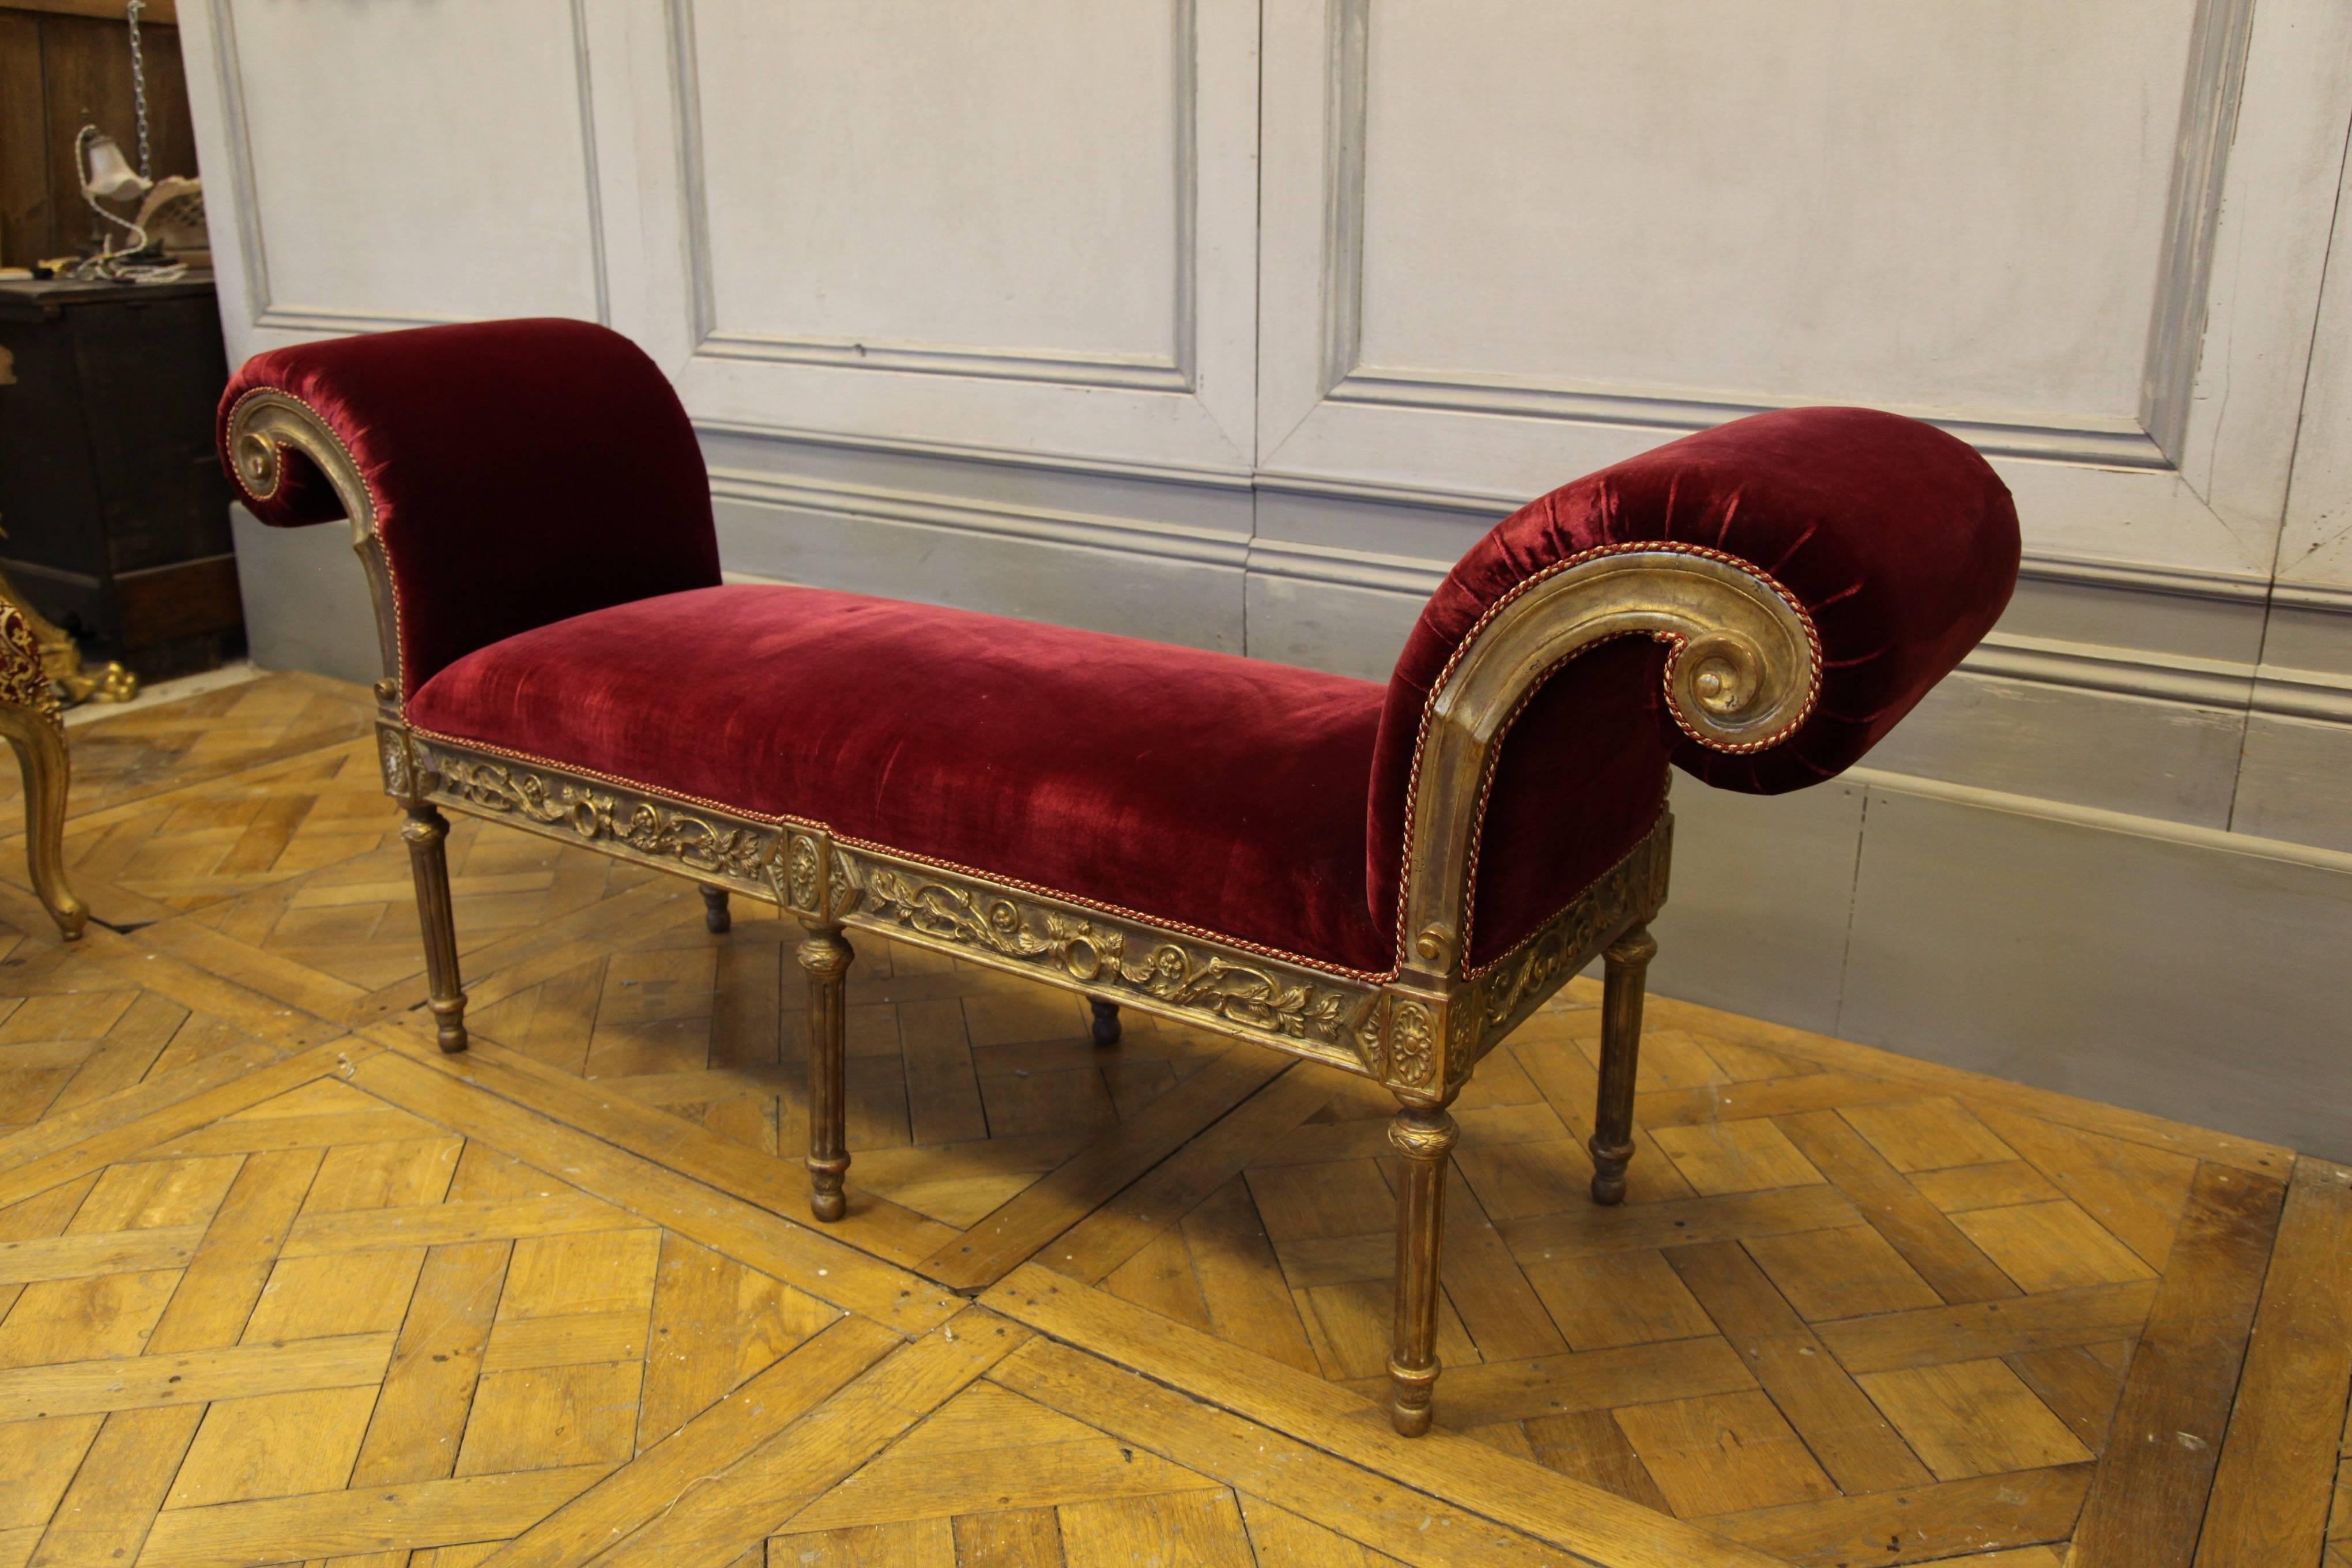 Louis XVI style giltwood banquette with scroll top arms: Hand-carved by master craftsmen and hand finished in an antique gilded patina using traditional methods and materials. Upholstered in a red velvet fabric with rope trim finish as seen in the